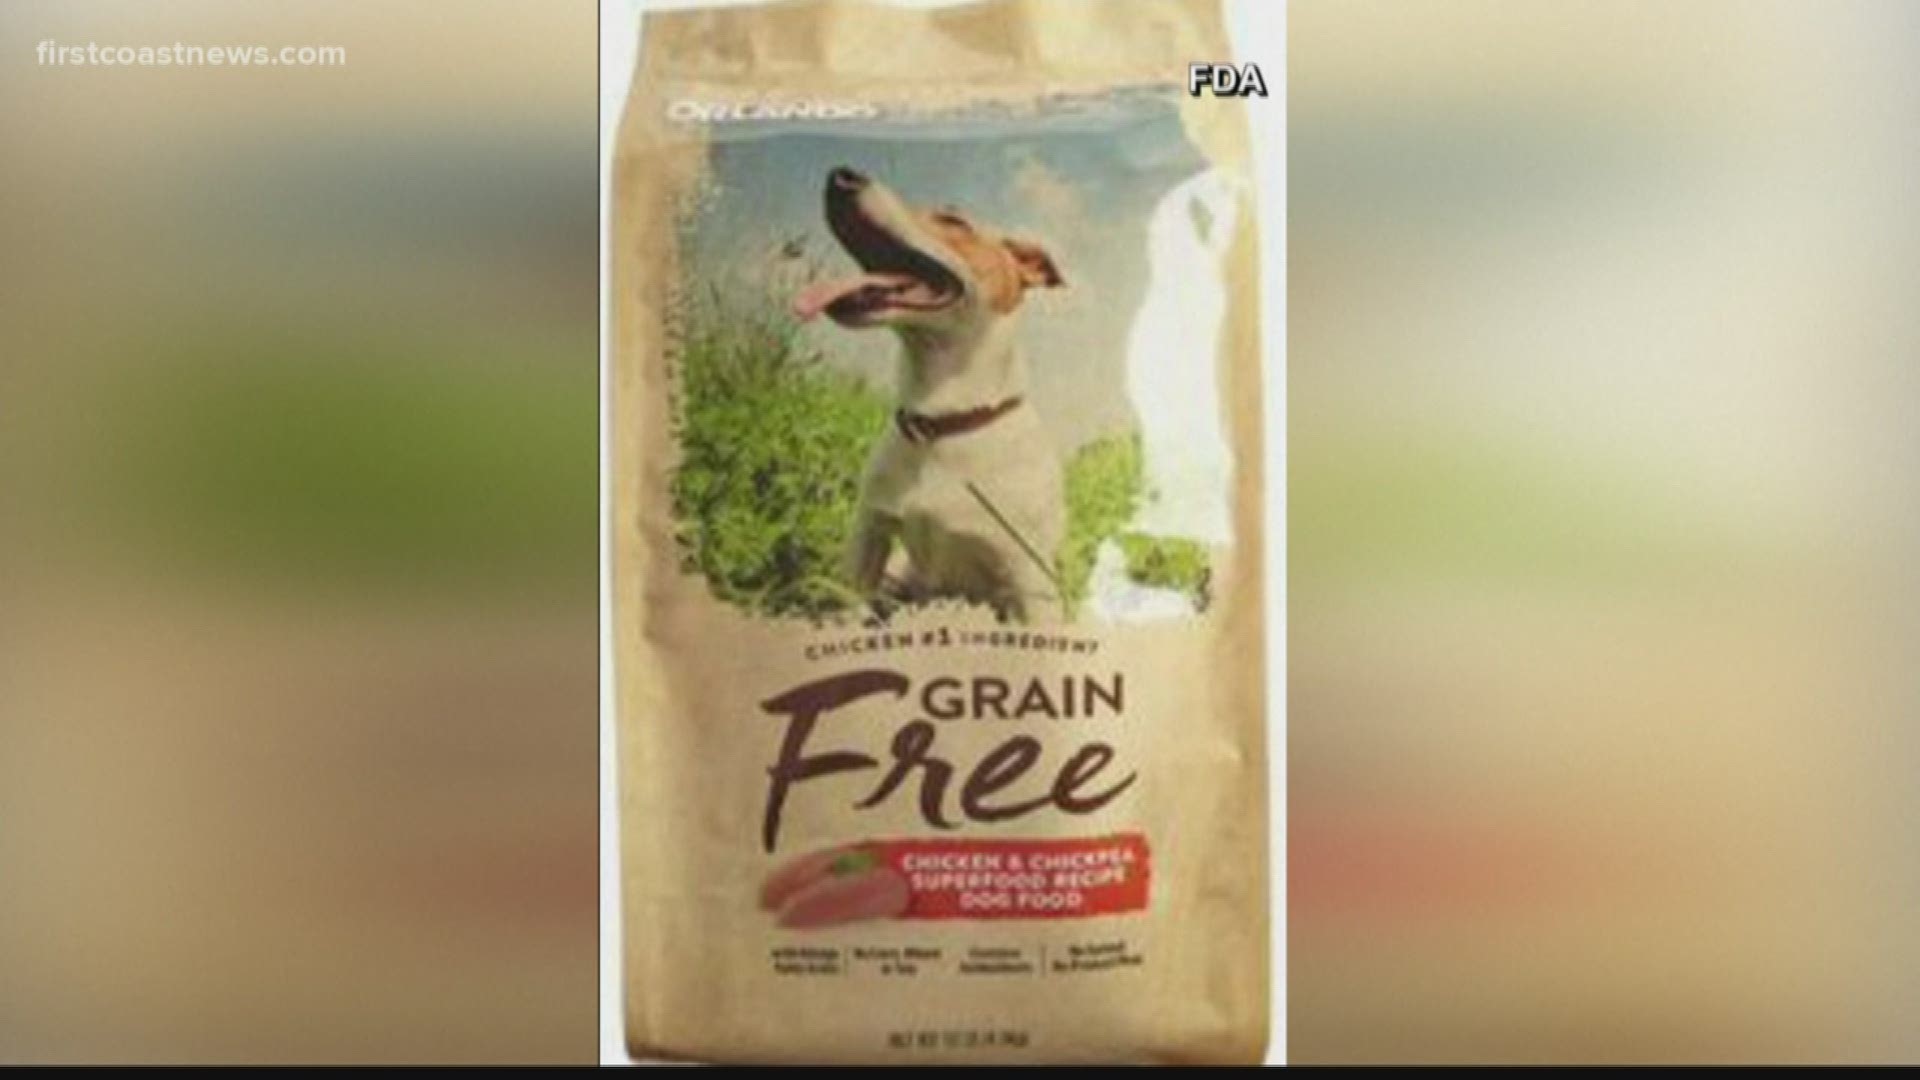 which brands of dog food have been recalled